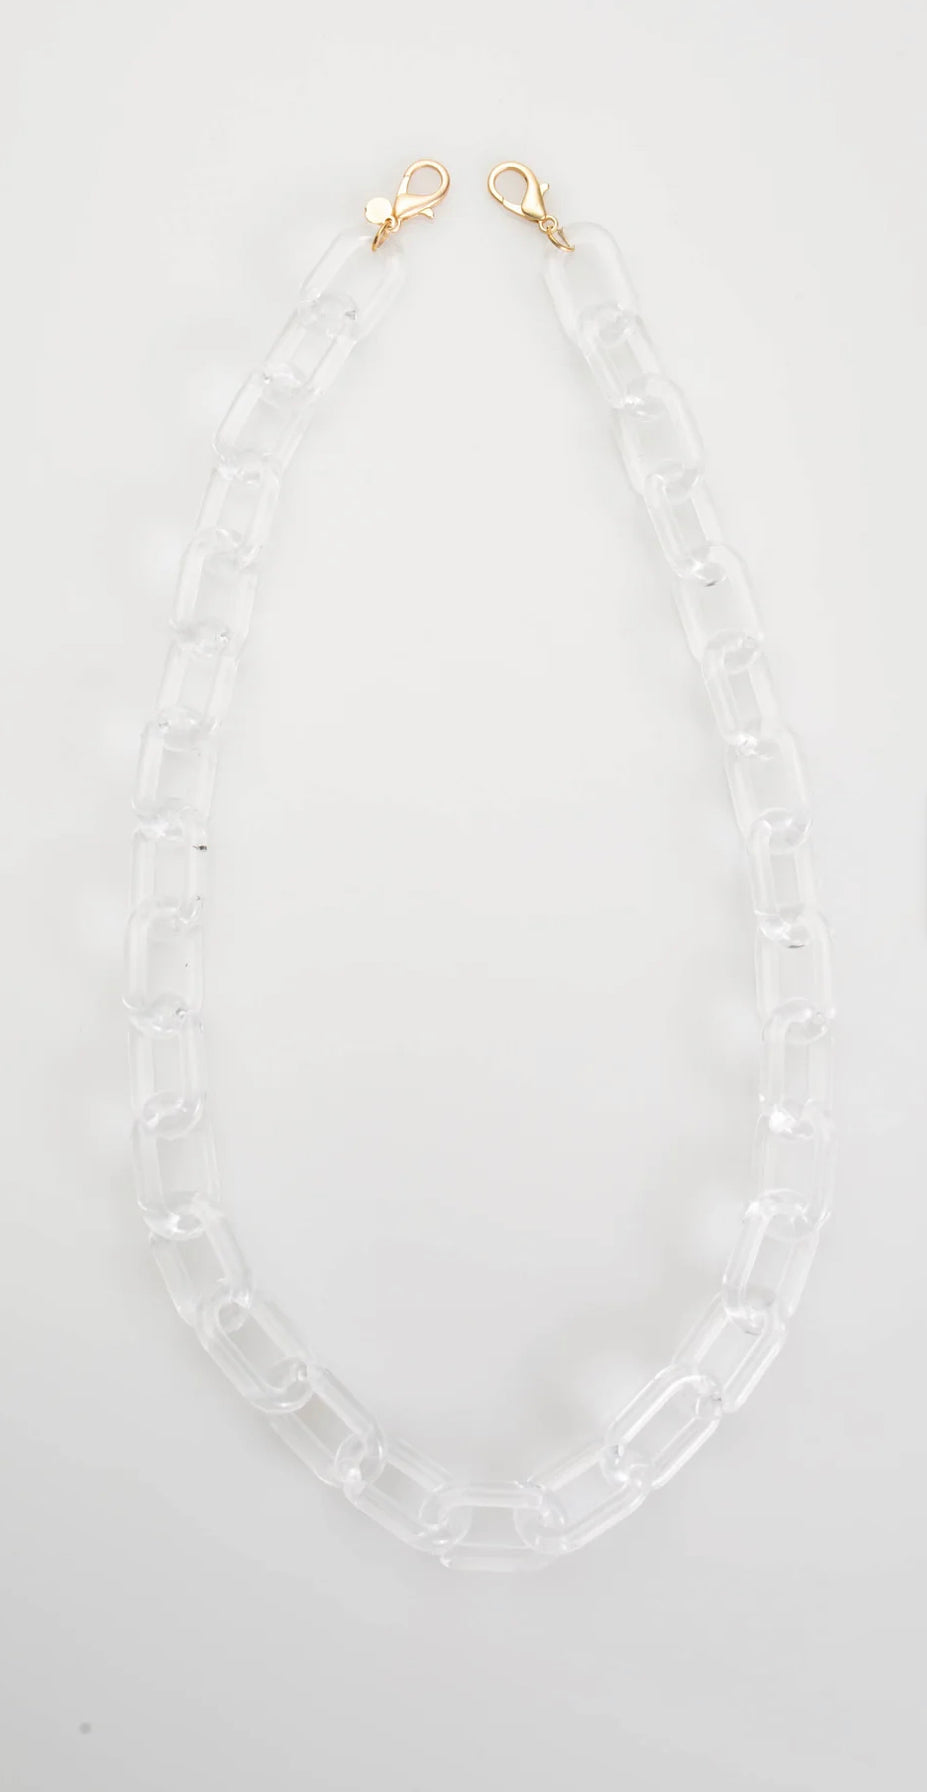 Claire Lucite Chain-410 Jewelry-Simply Stylish Boutique-Simply Stylish Boutique | Women’s & Kid’s Fashion | Paducah, KY